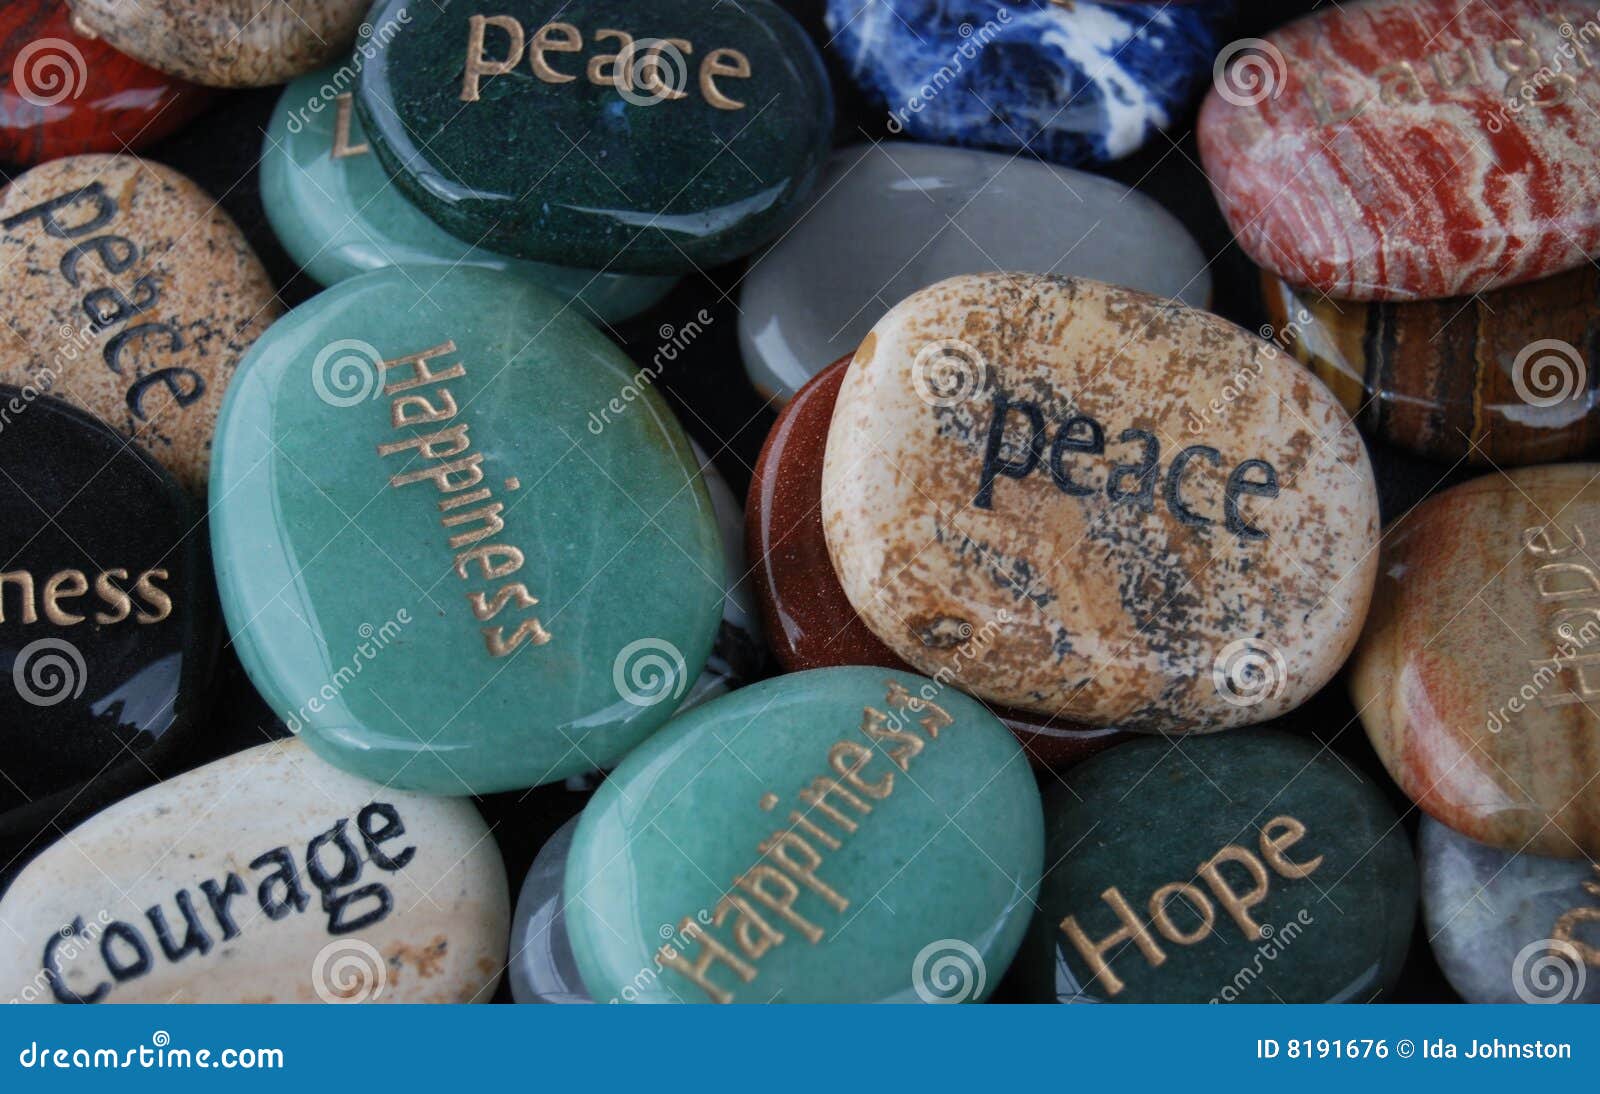 blessing stones, hope, courage, happiness